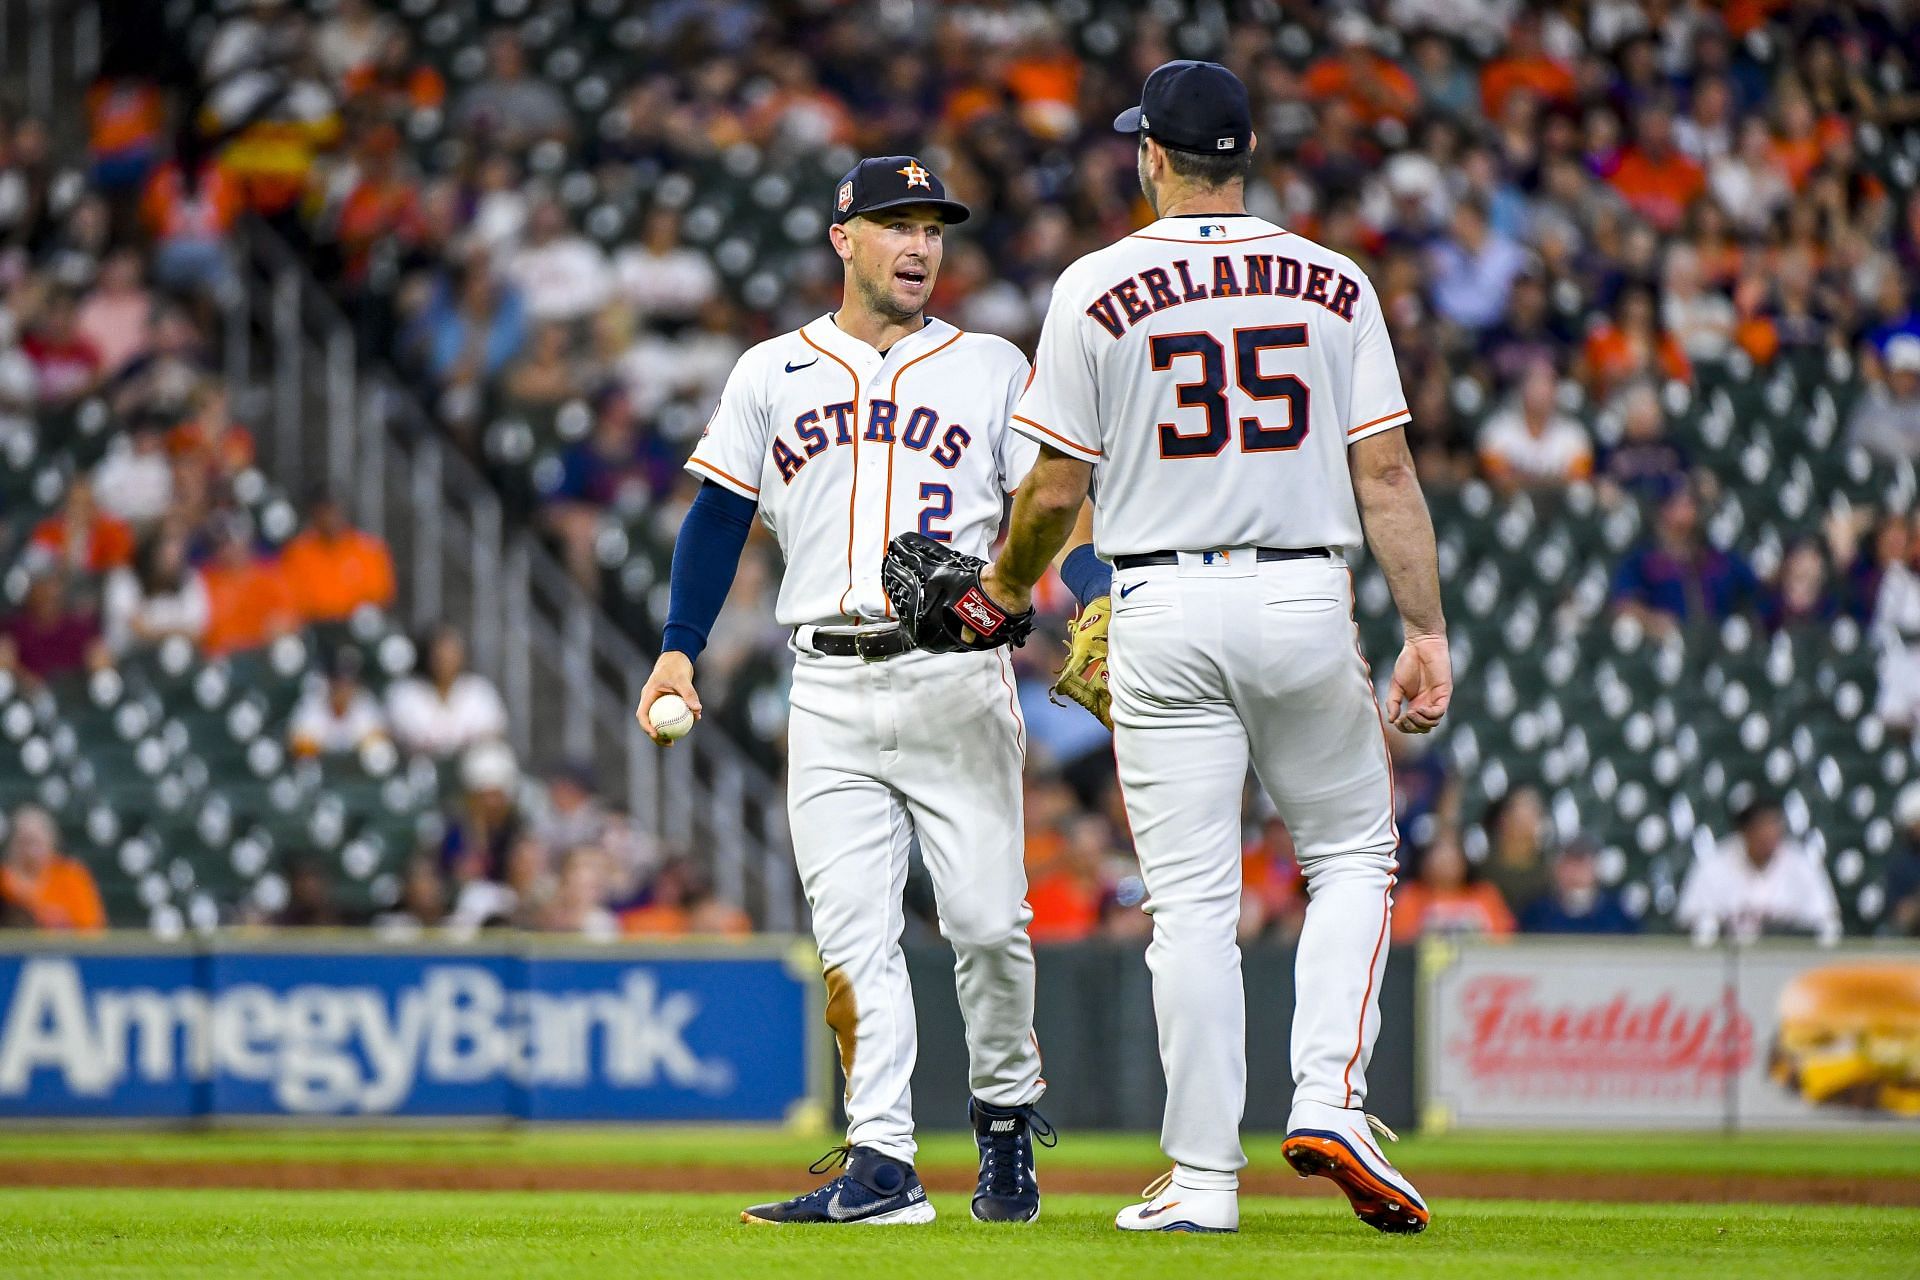 Astros veteran leadership will have to step up